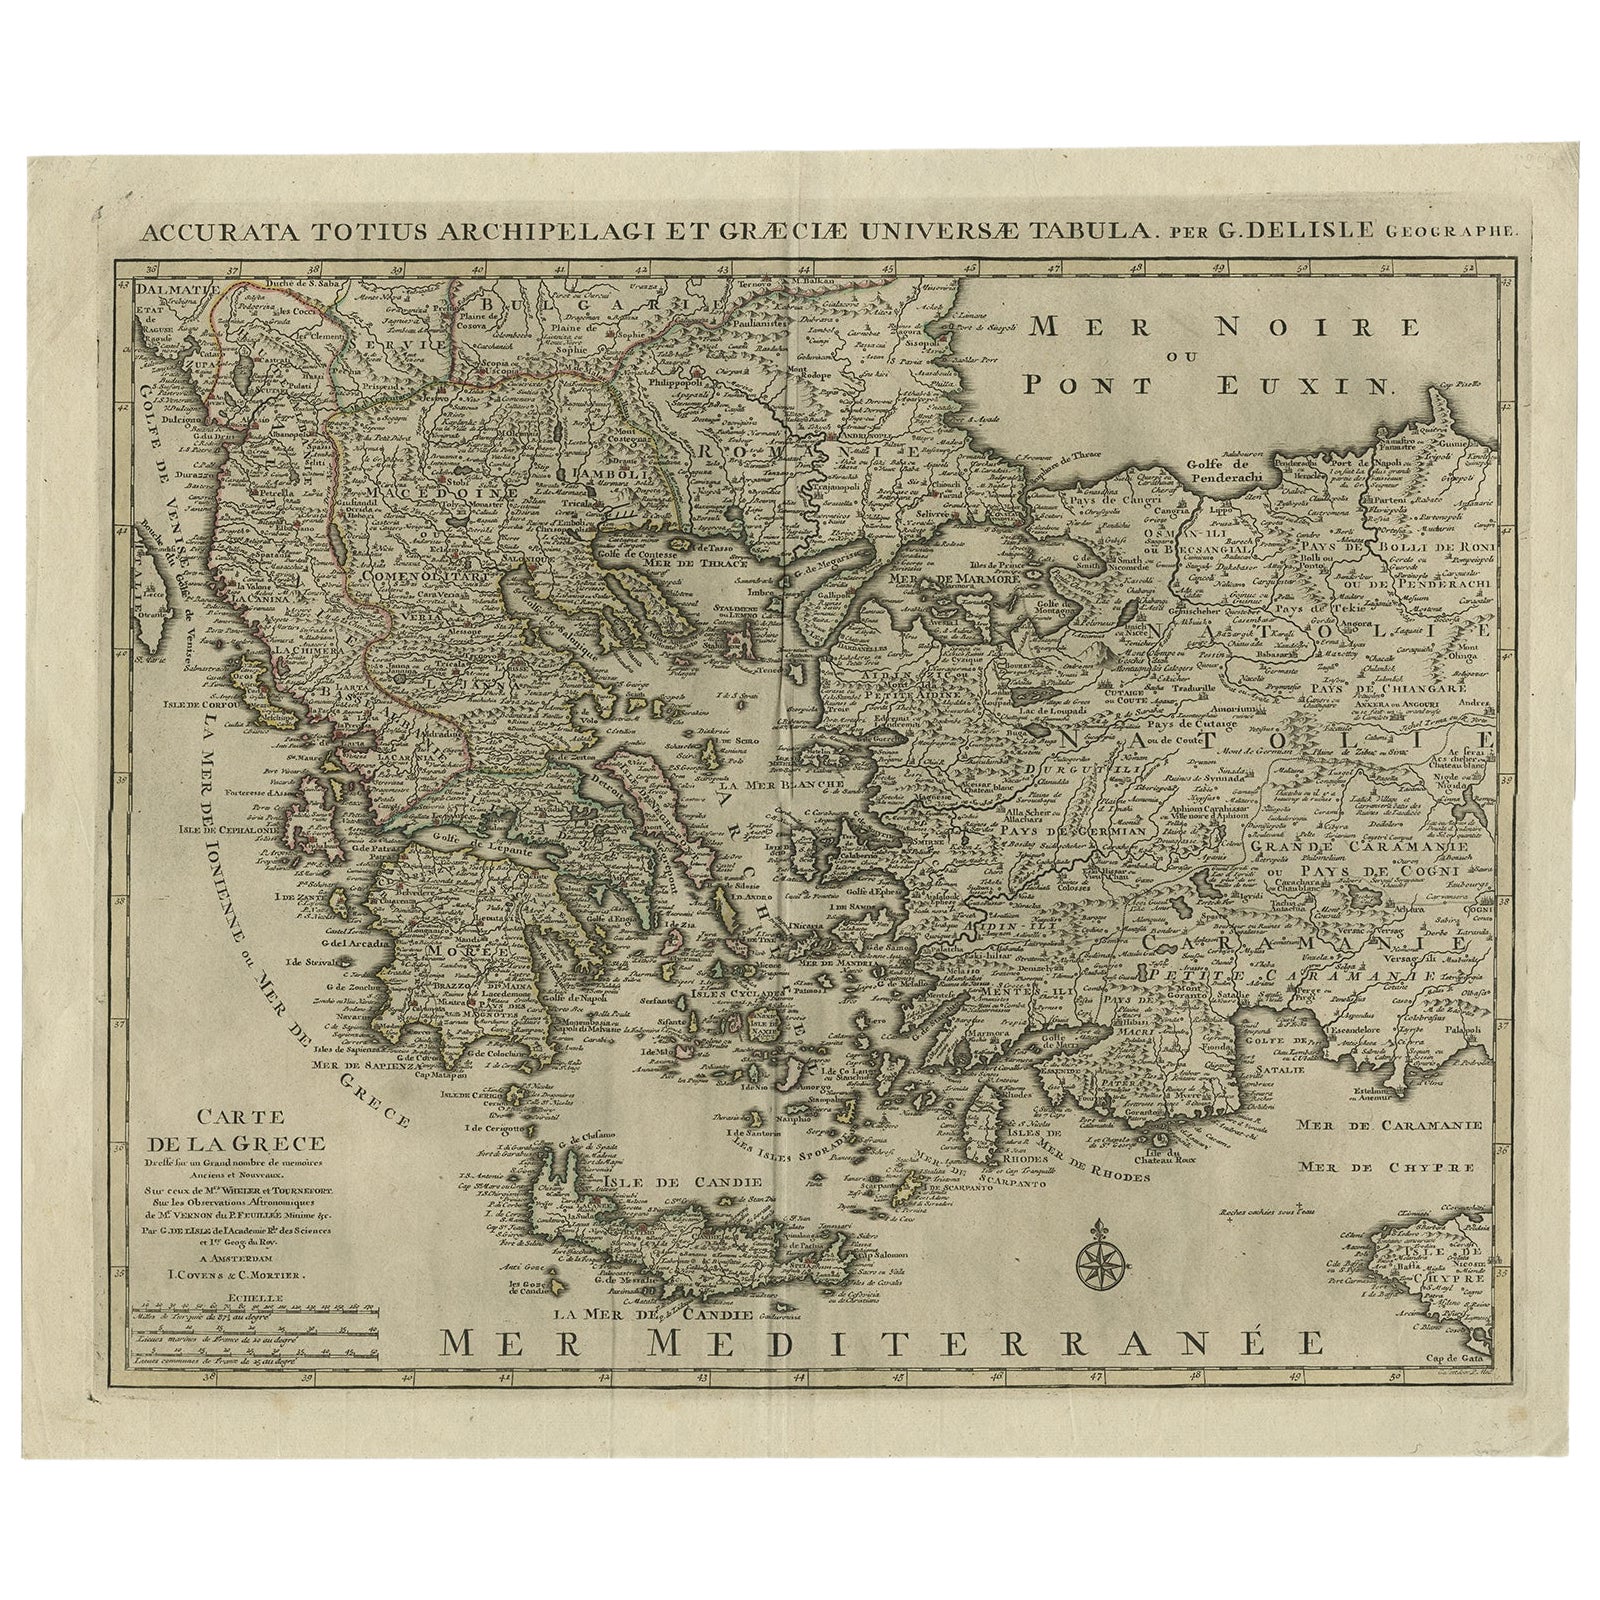 Antique Map of Greece, Albania, Macedonia and Parts of Turkey and Cyprus, c.1745